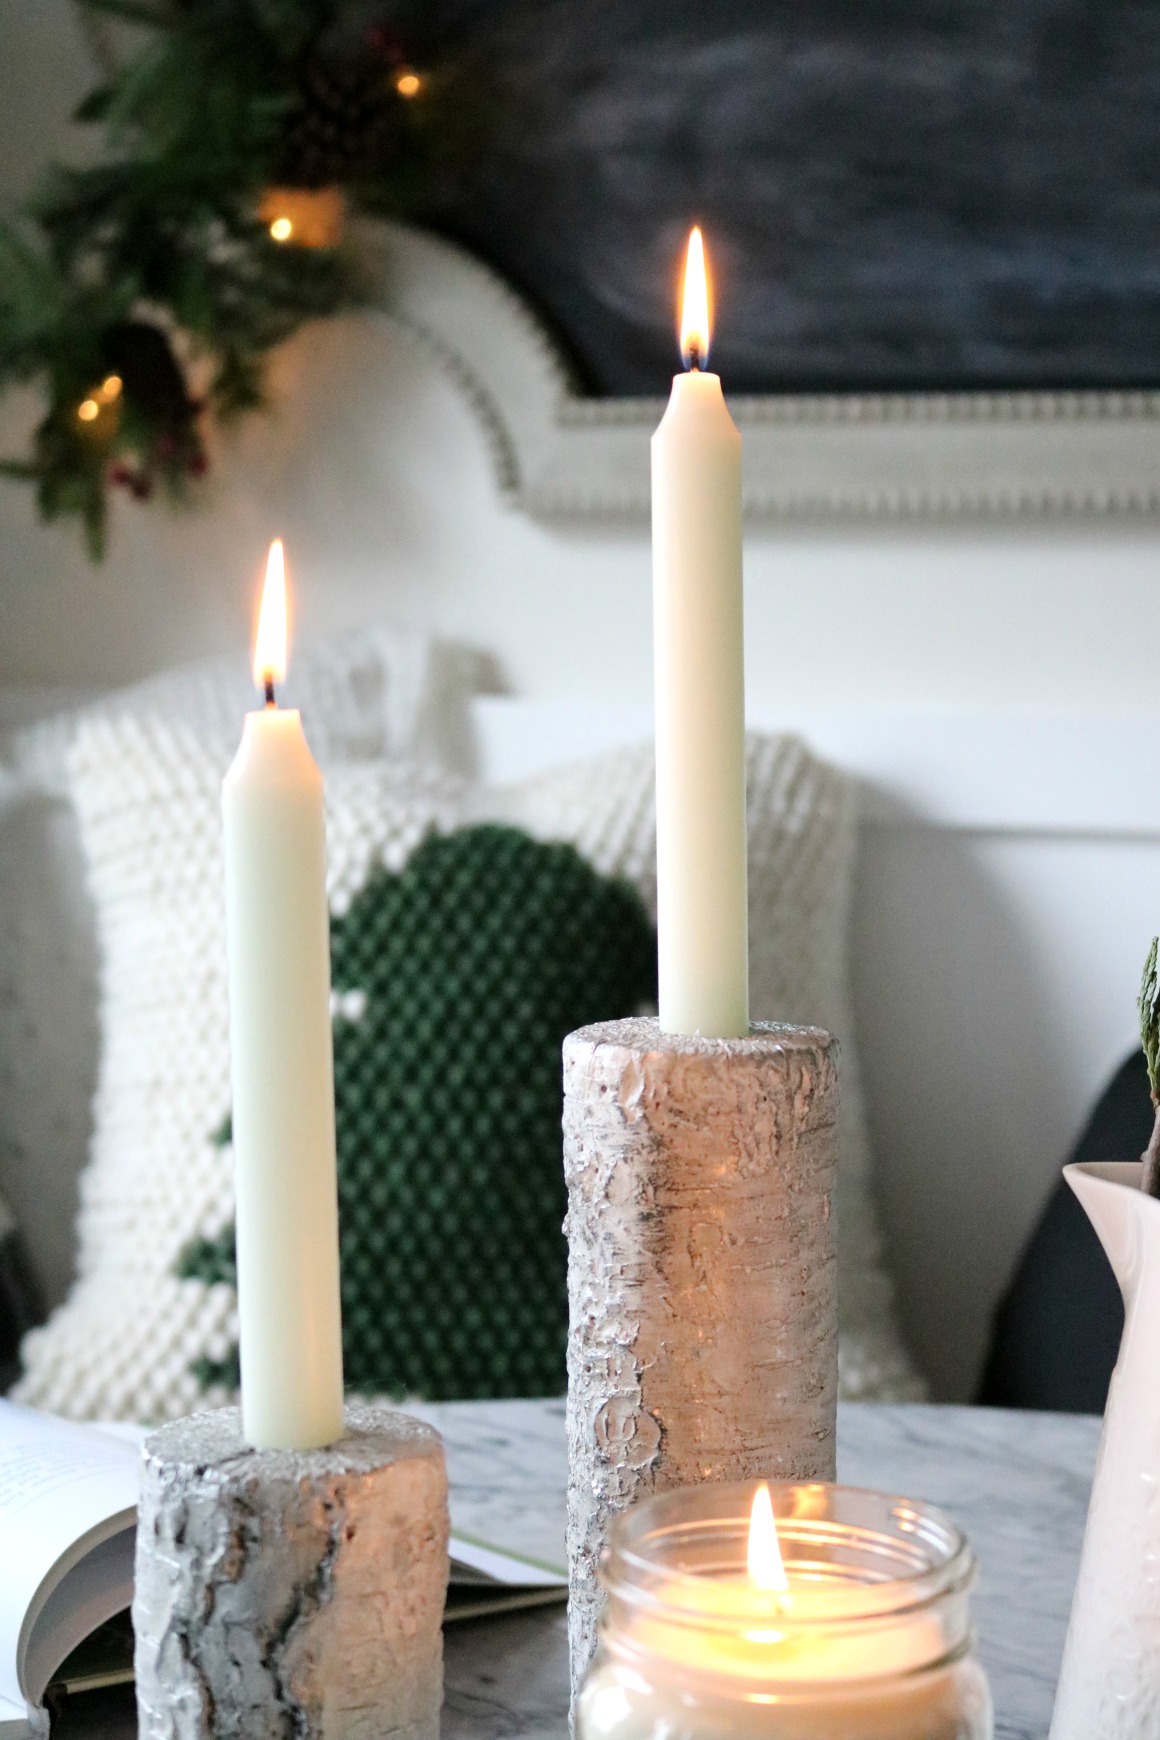 Hygge Christmas- How to Create a Merry Hygge Christmas